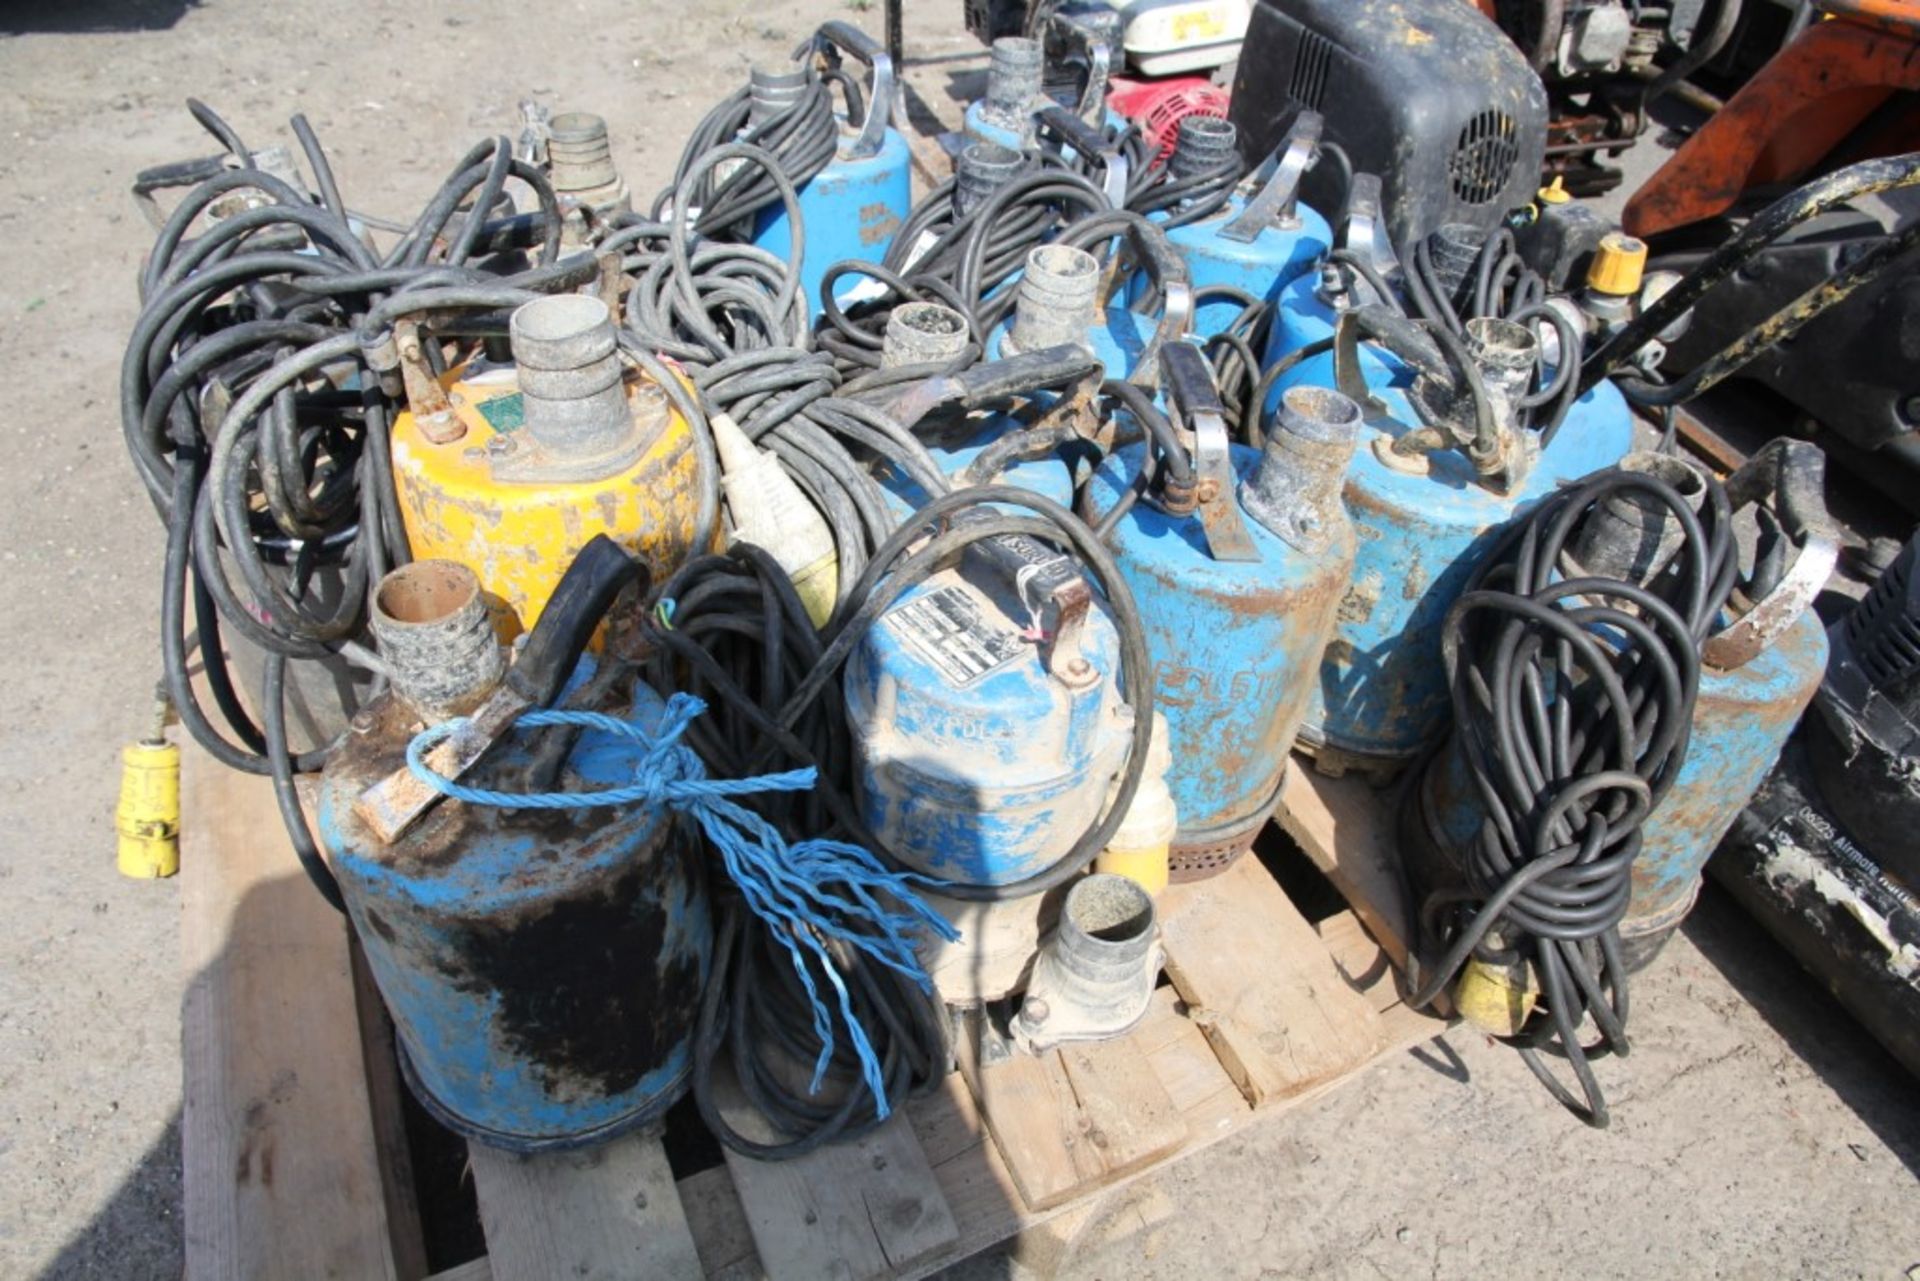 110v Submersible Water Pumps (18 of) - Image 4 of 4